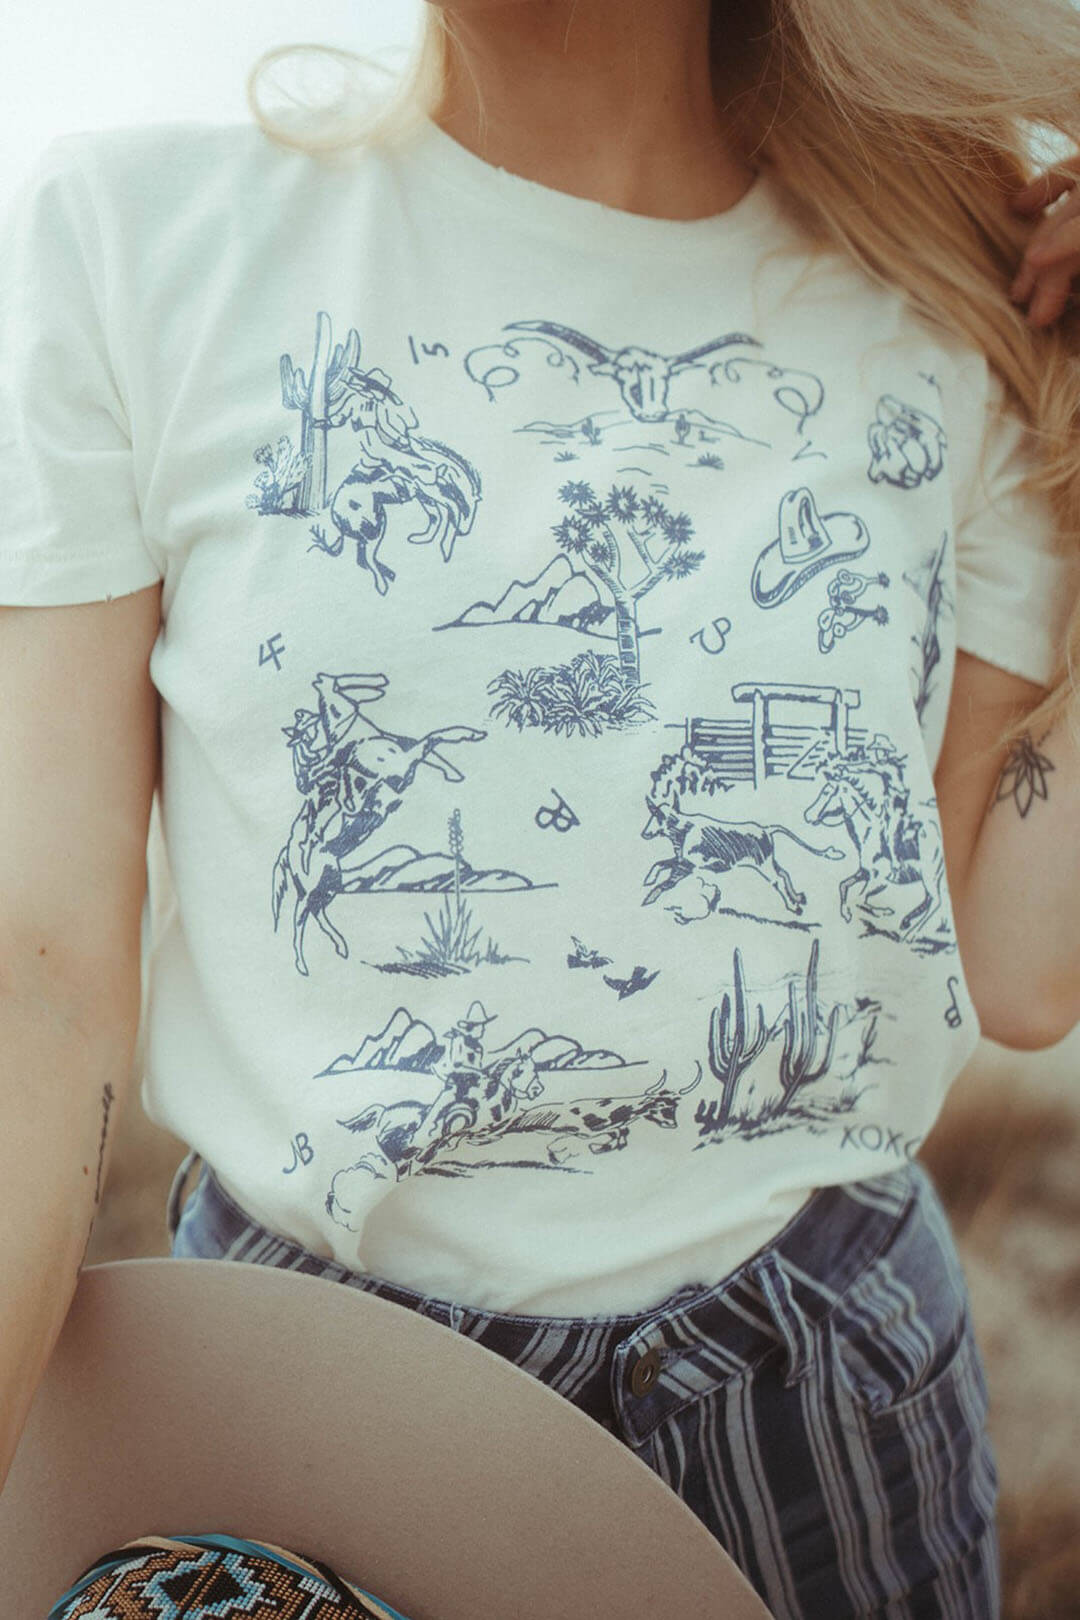 Close up image of the Western Toile Denim Graphic Tee from XOXO art & comanpy featuring western images throughout from cactus, cowboys, and cowskulls.